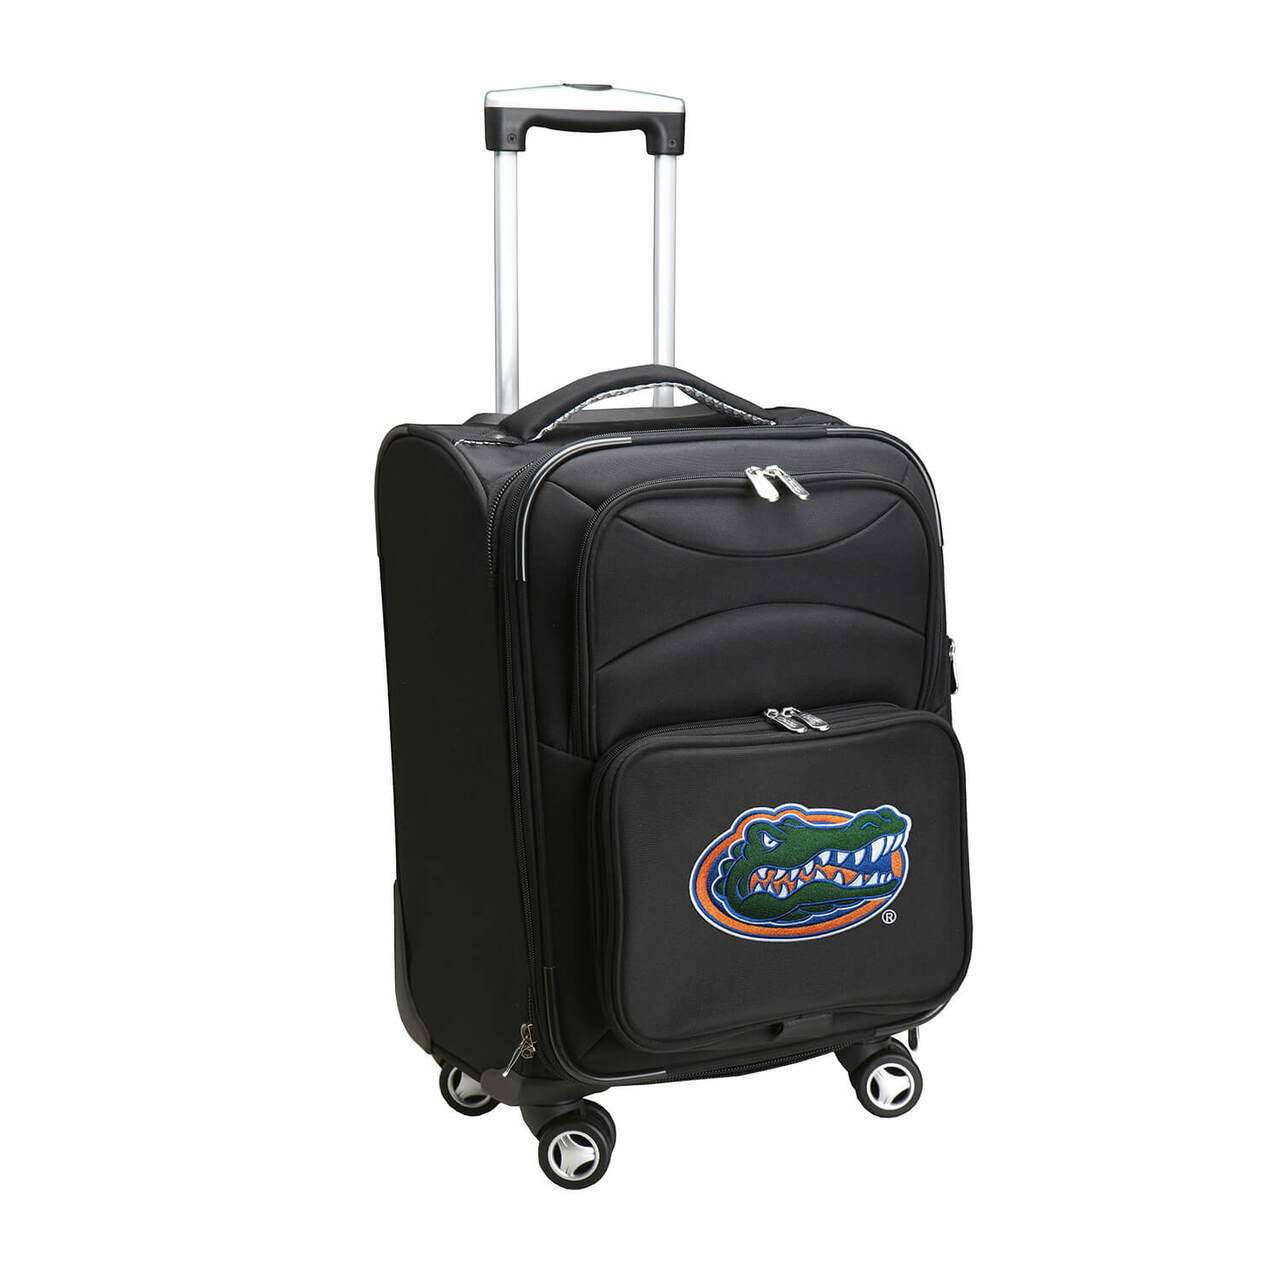 Florida Gators 21" Carry-on Spinner Luggage